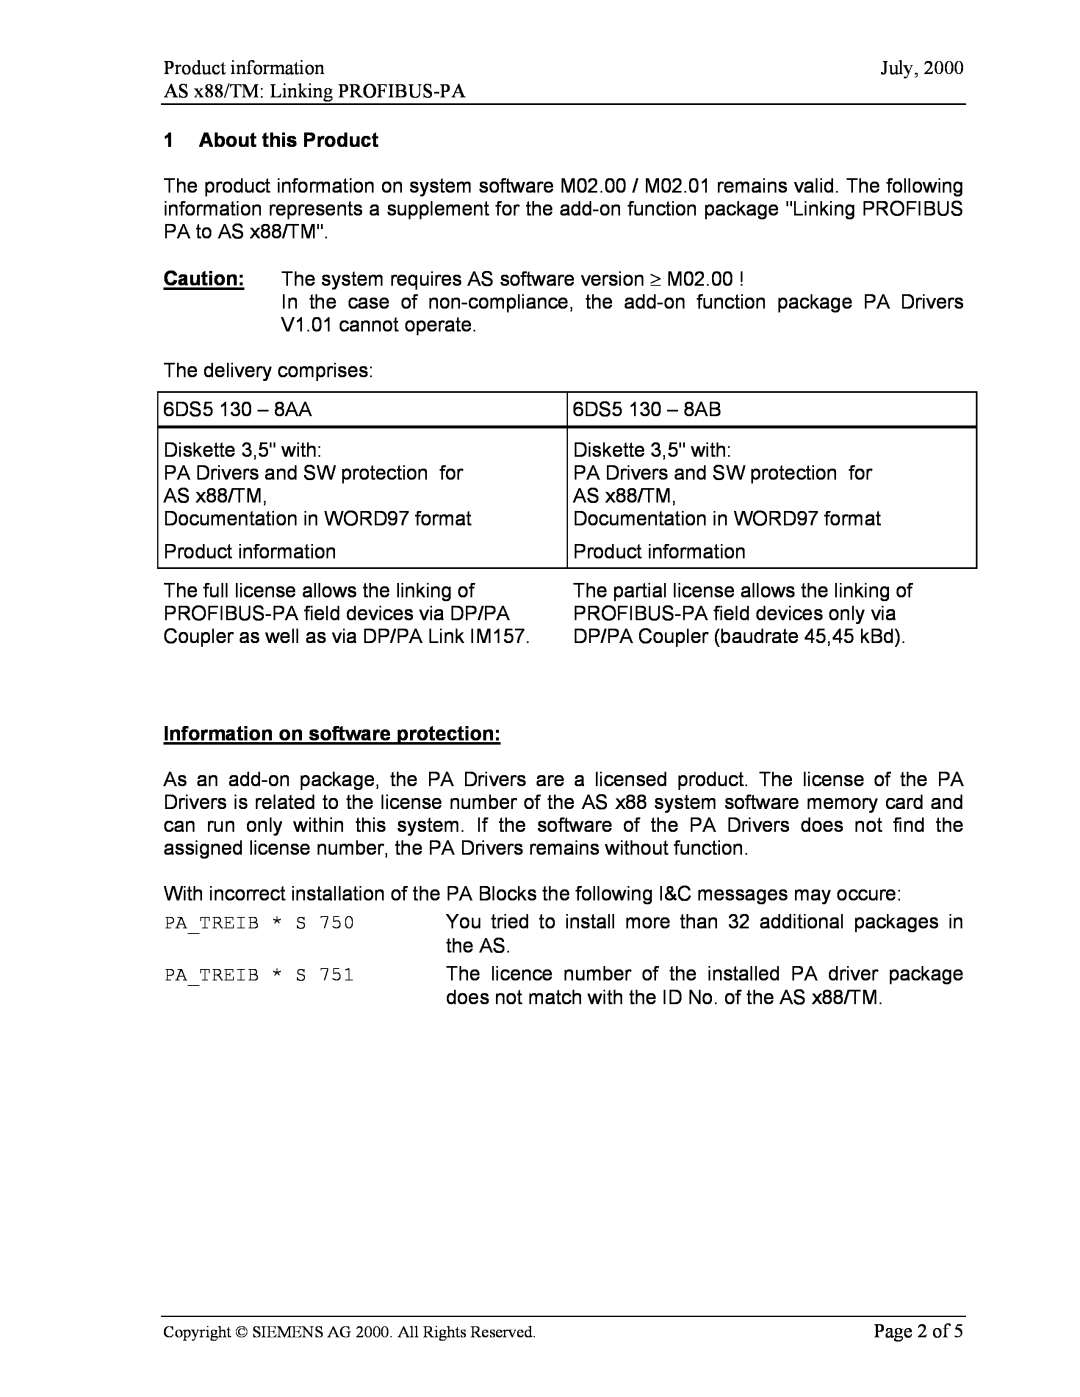 Fujitsu Siemens Computers manual Product information, July, AS x88/TM Linking PROFIBUS-PA, About this Product, Page 2 of 